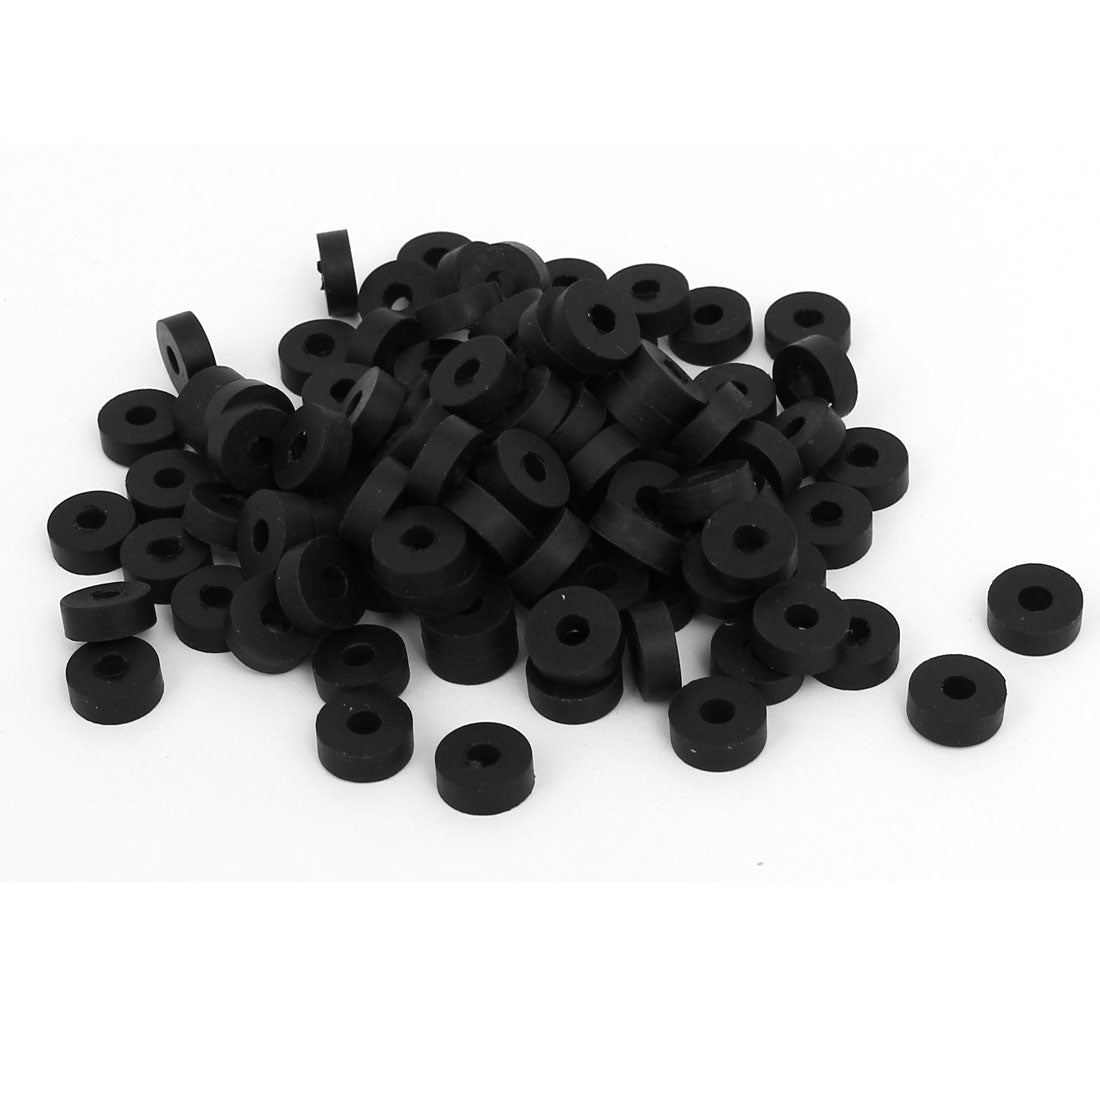 uxcell Uxcell 11mm OD O-Ring Hose Gasket Flat Rubber  Lot for  Grommet 100pcs